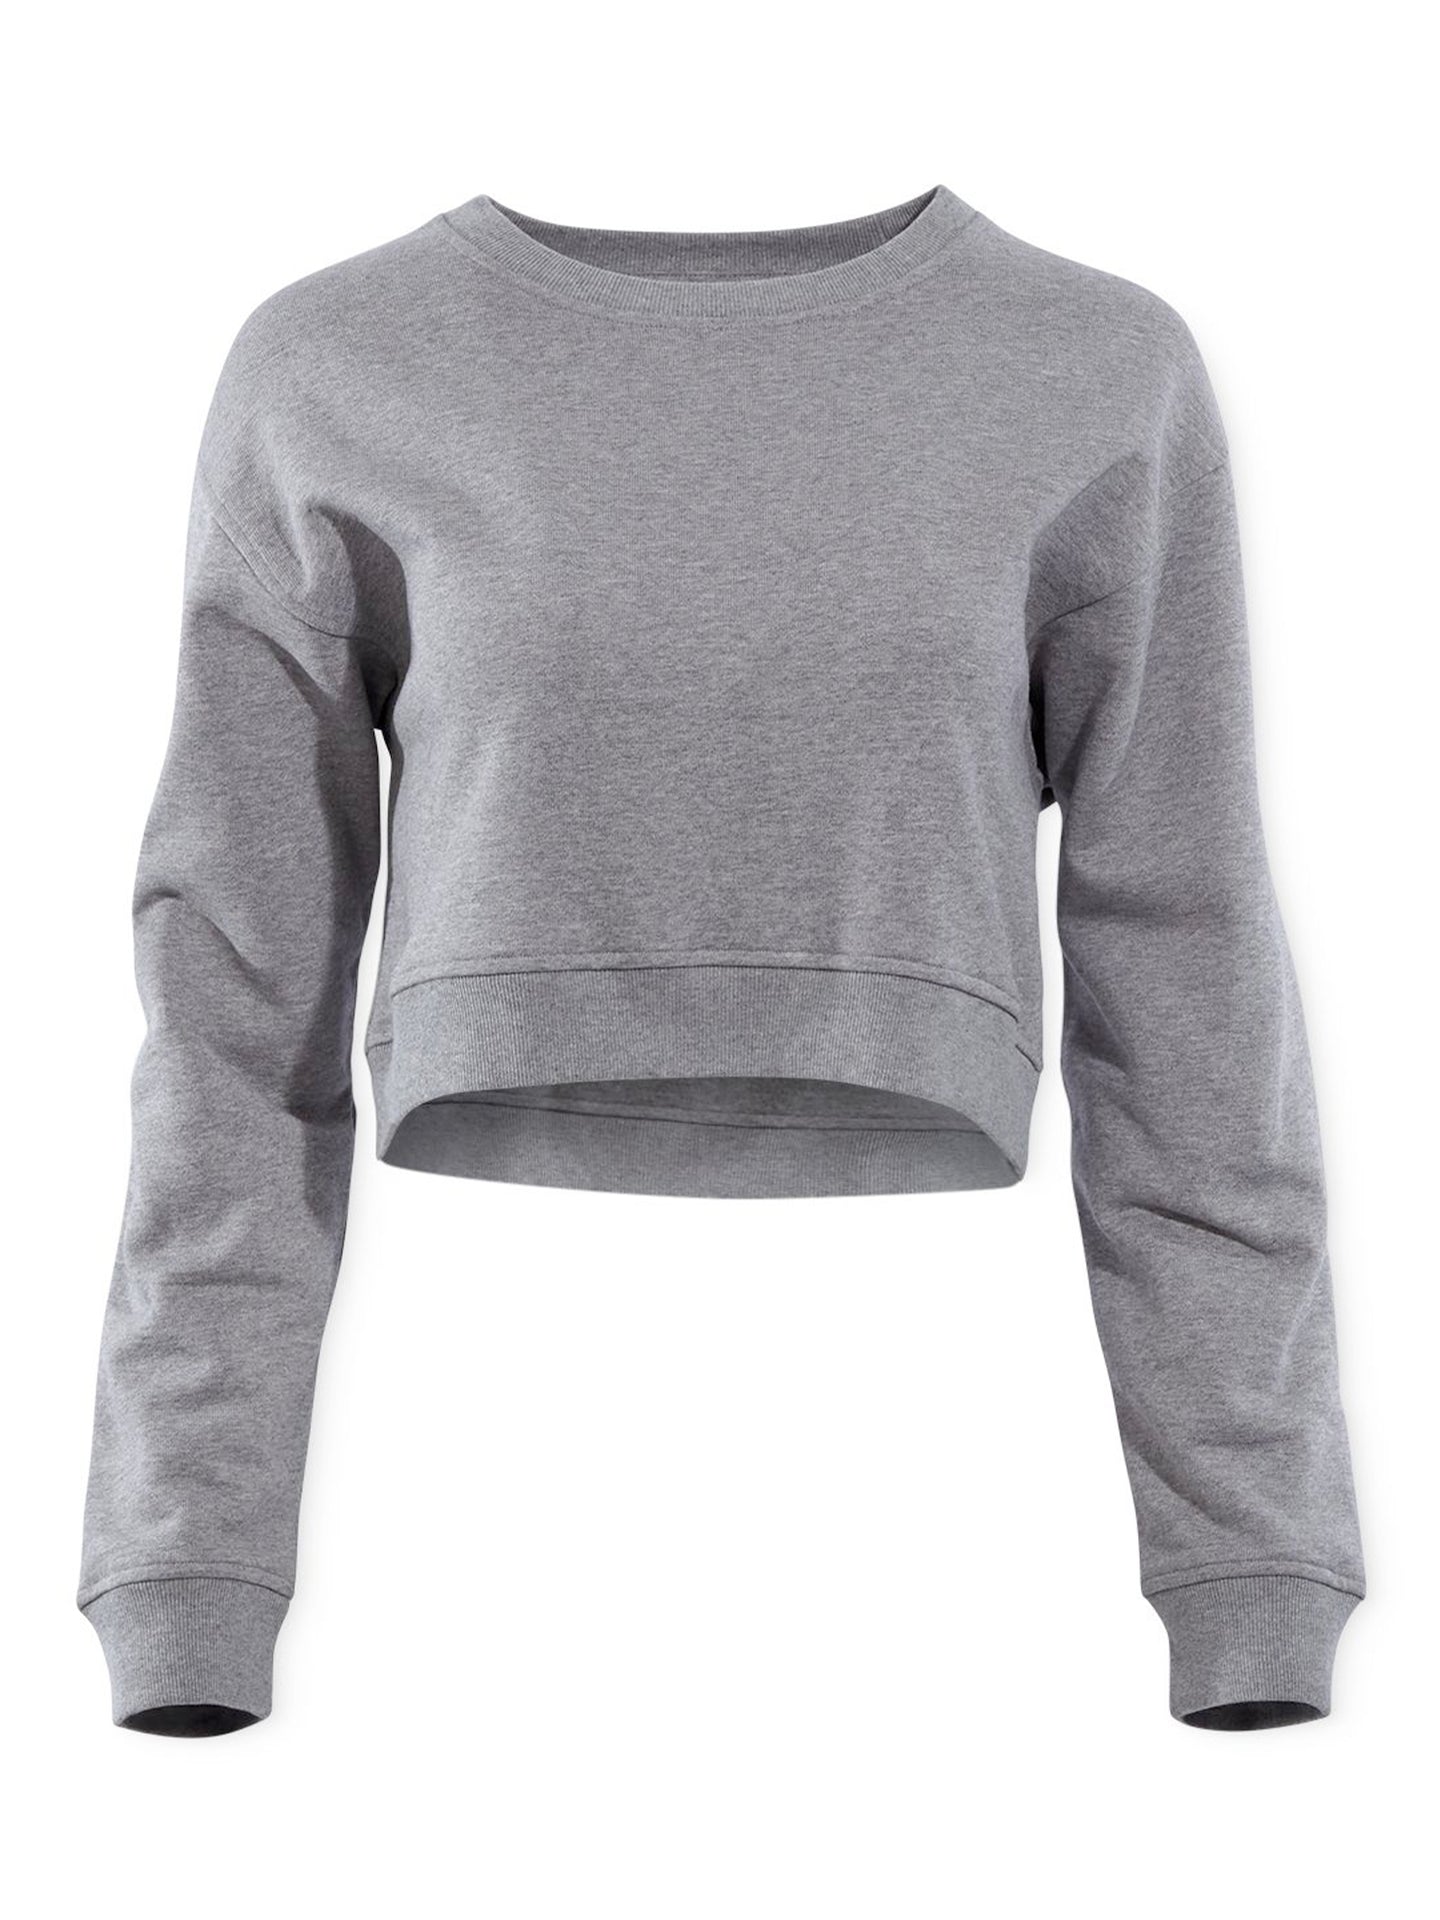 02 FRENCH TERRY CROPPED SWEATSHIRT